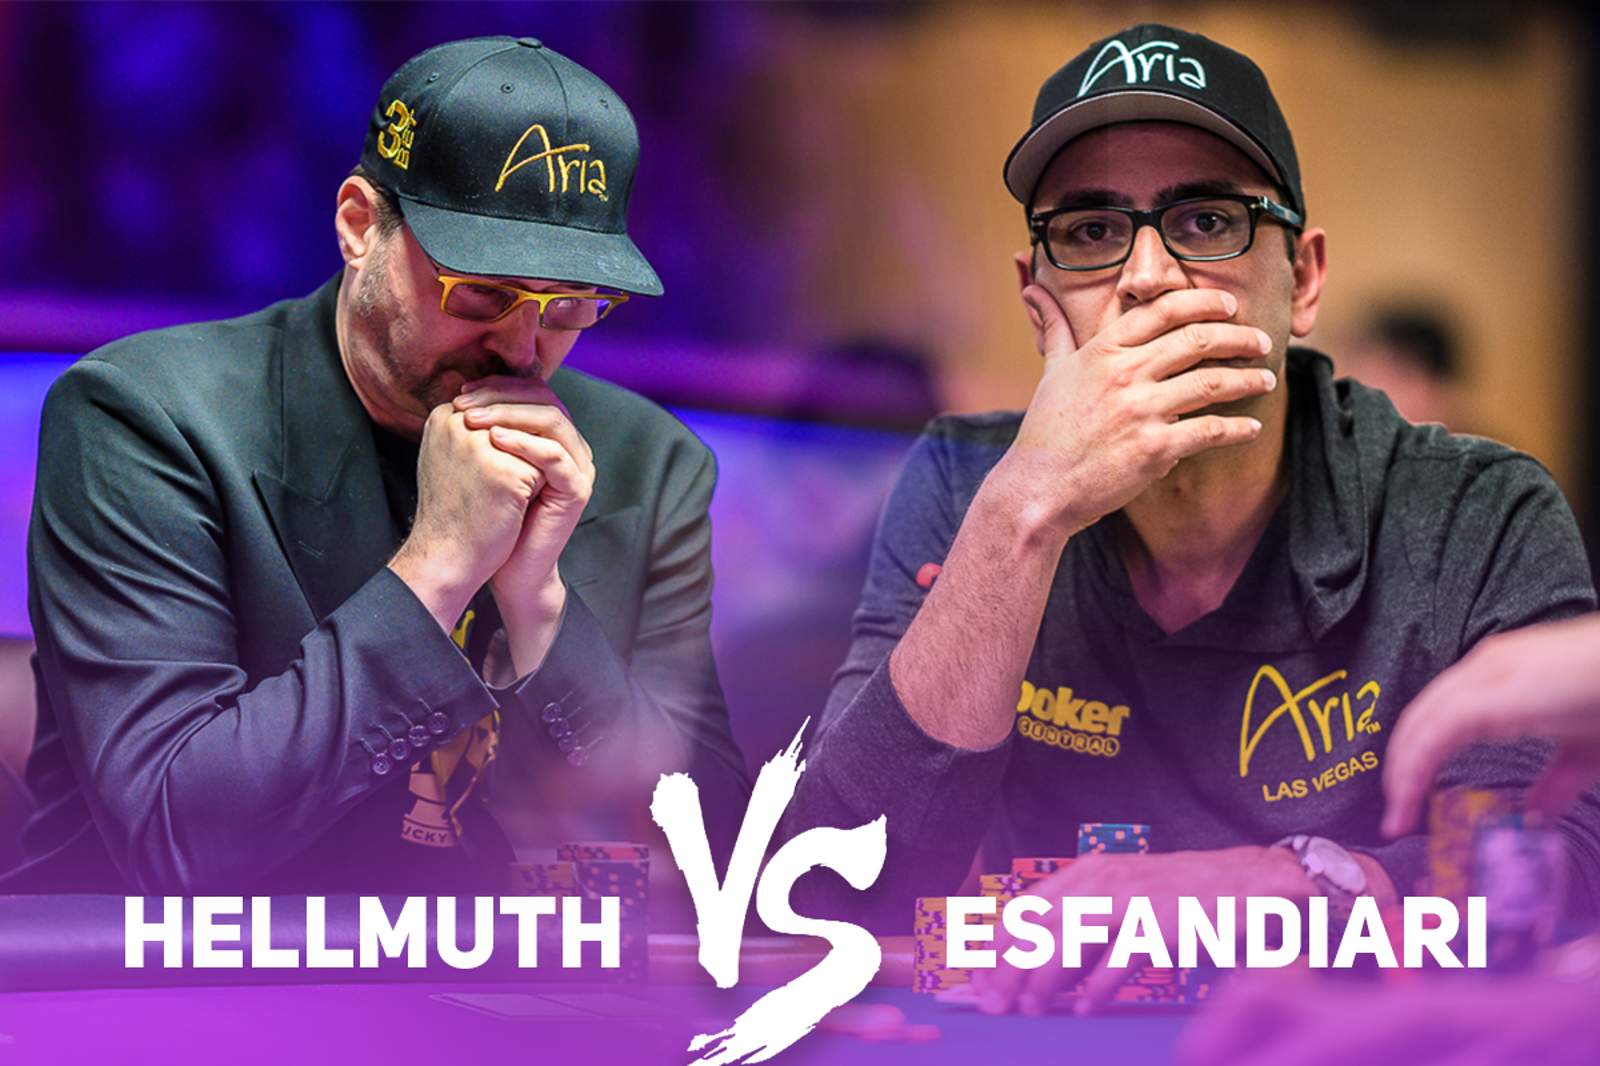 Hellmuth vs Esfandiari: An Iconic Heads-Up Battle in the Making?